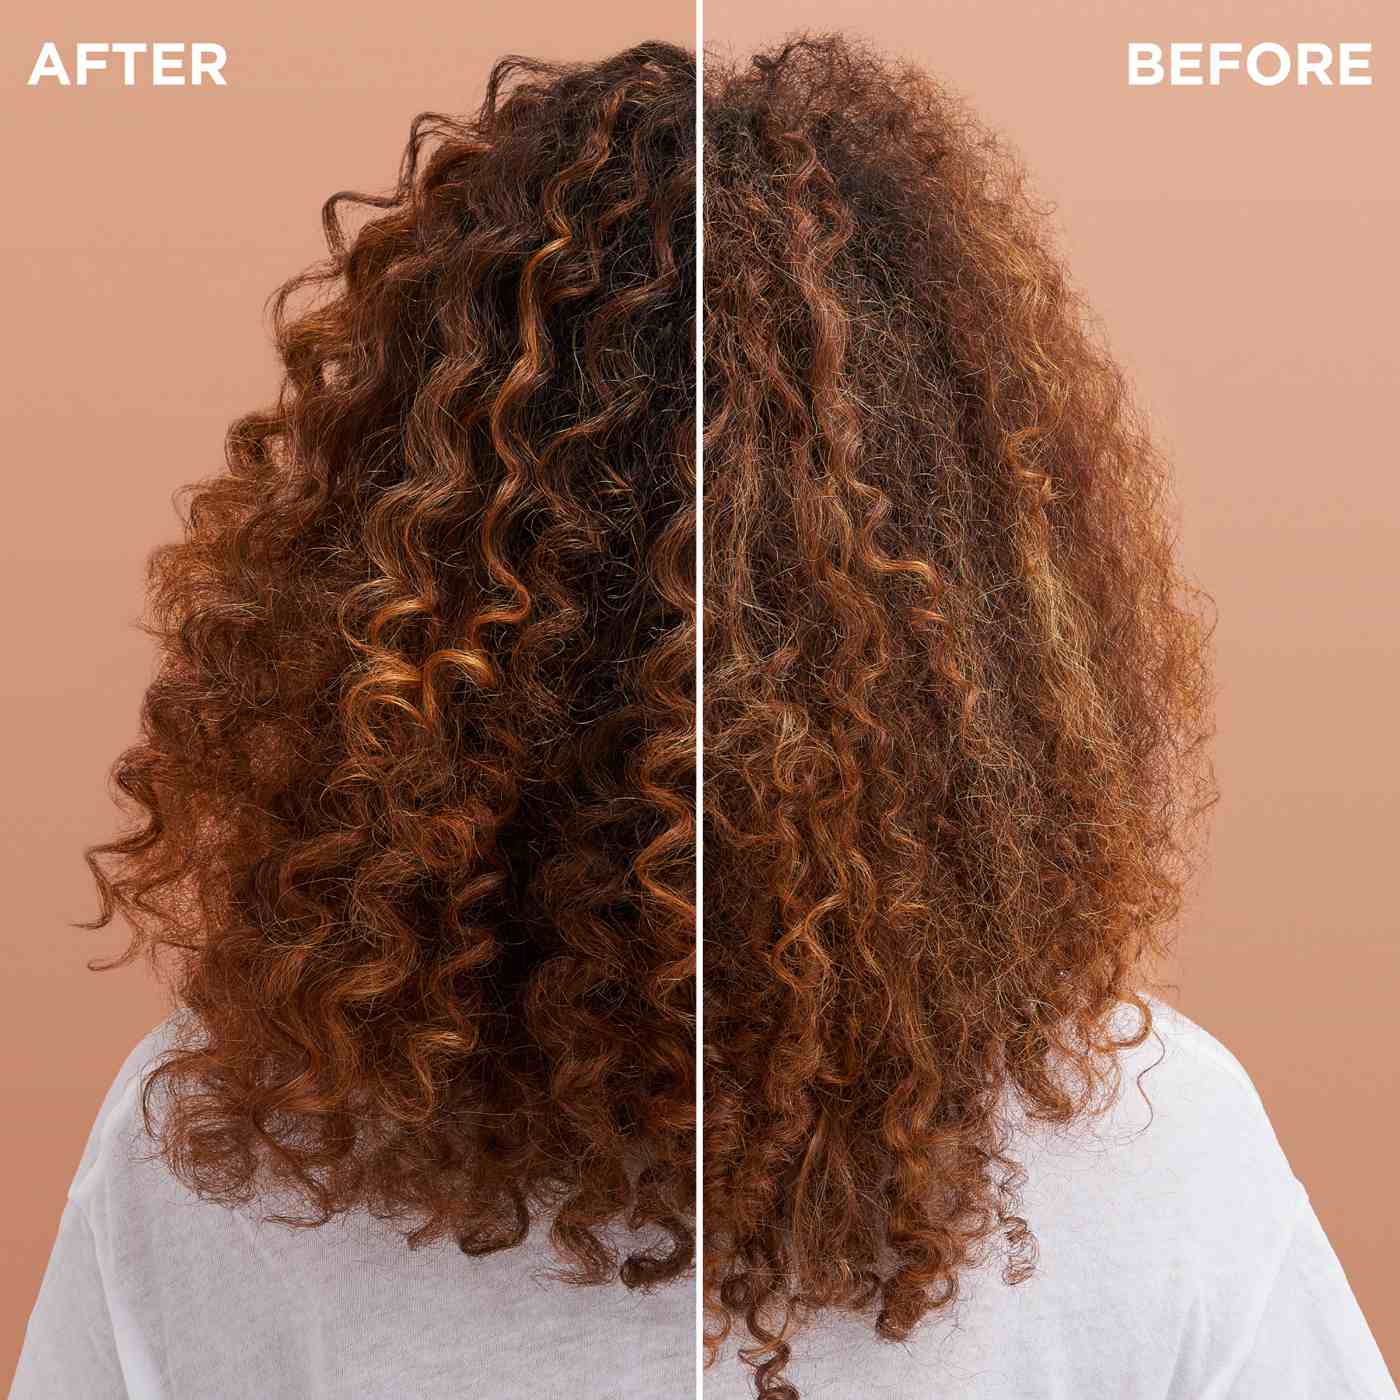 Garnier Whole Blends Leave-In Conditioner, Coconut Oil and Cocoa Butter; image 6 of 10